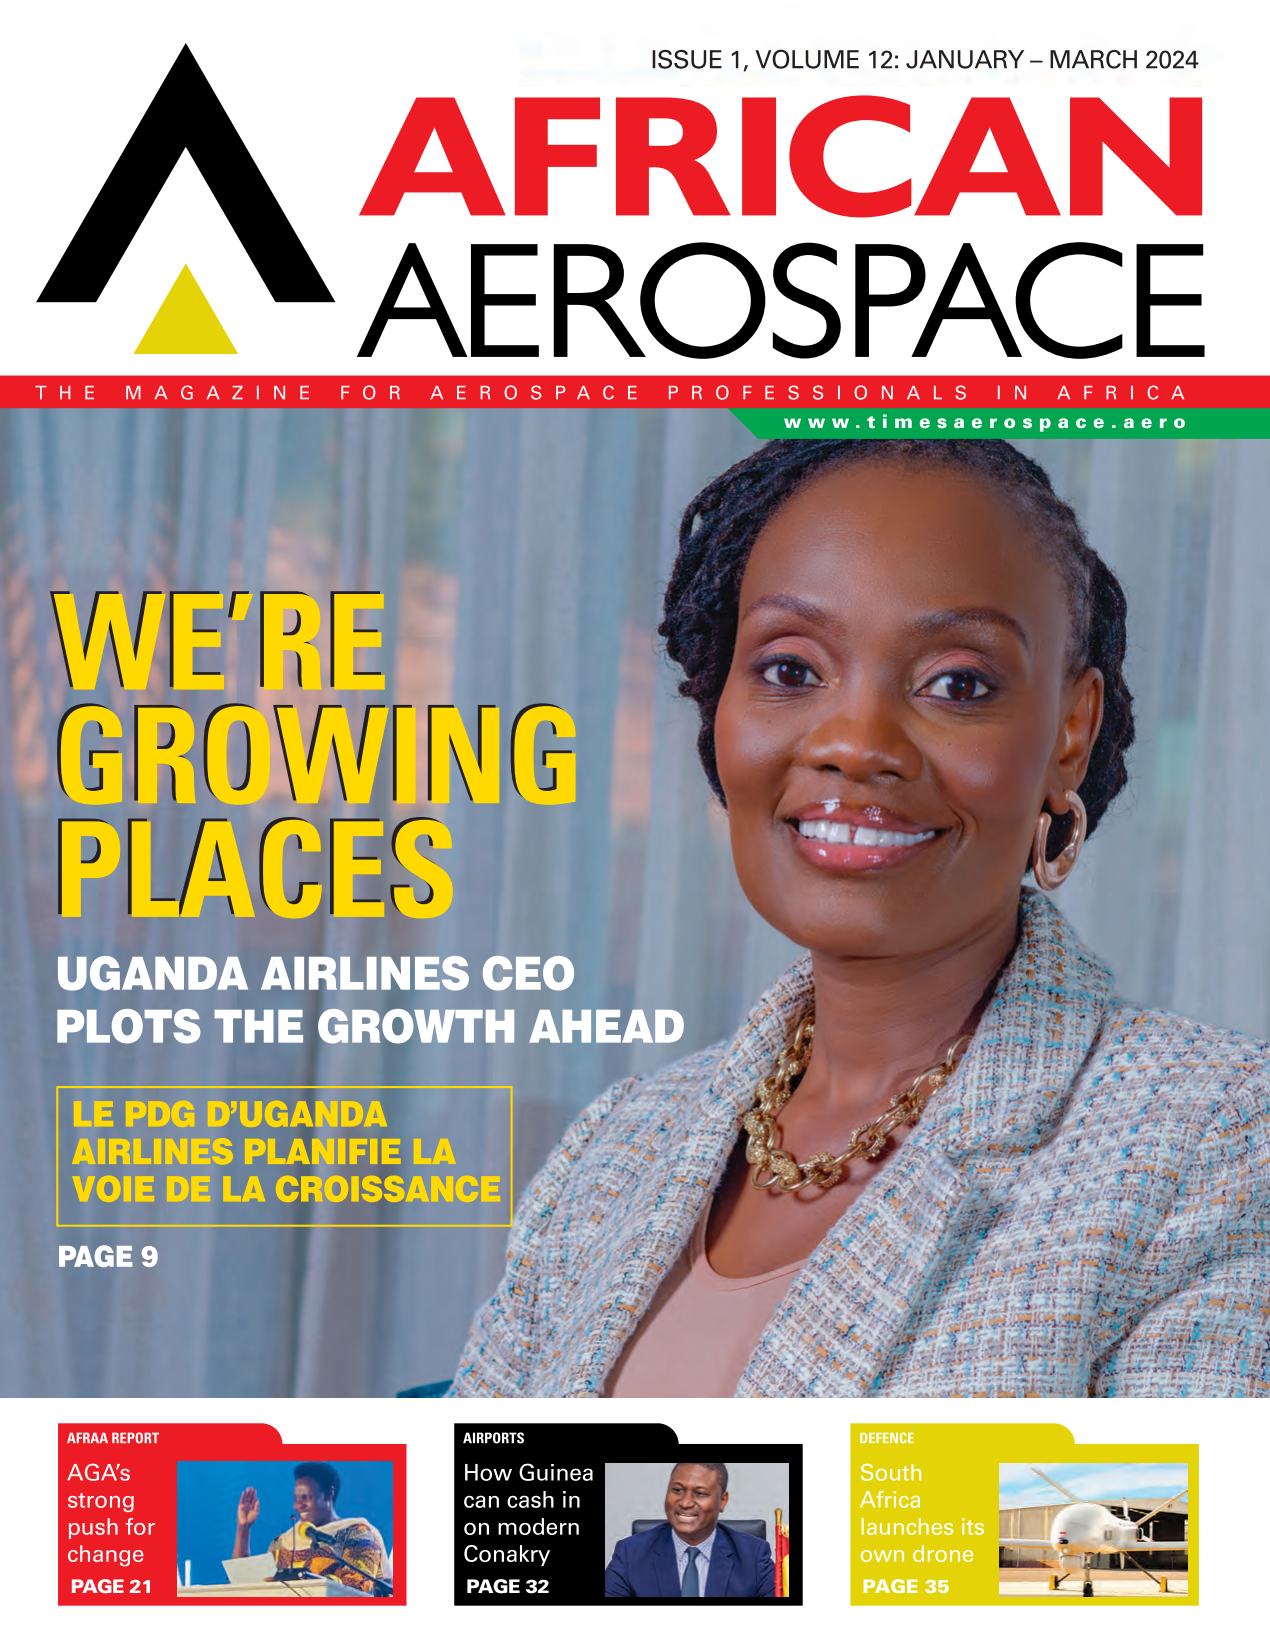 African Aerospace: January - March 2024